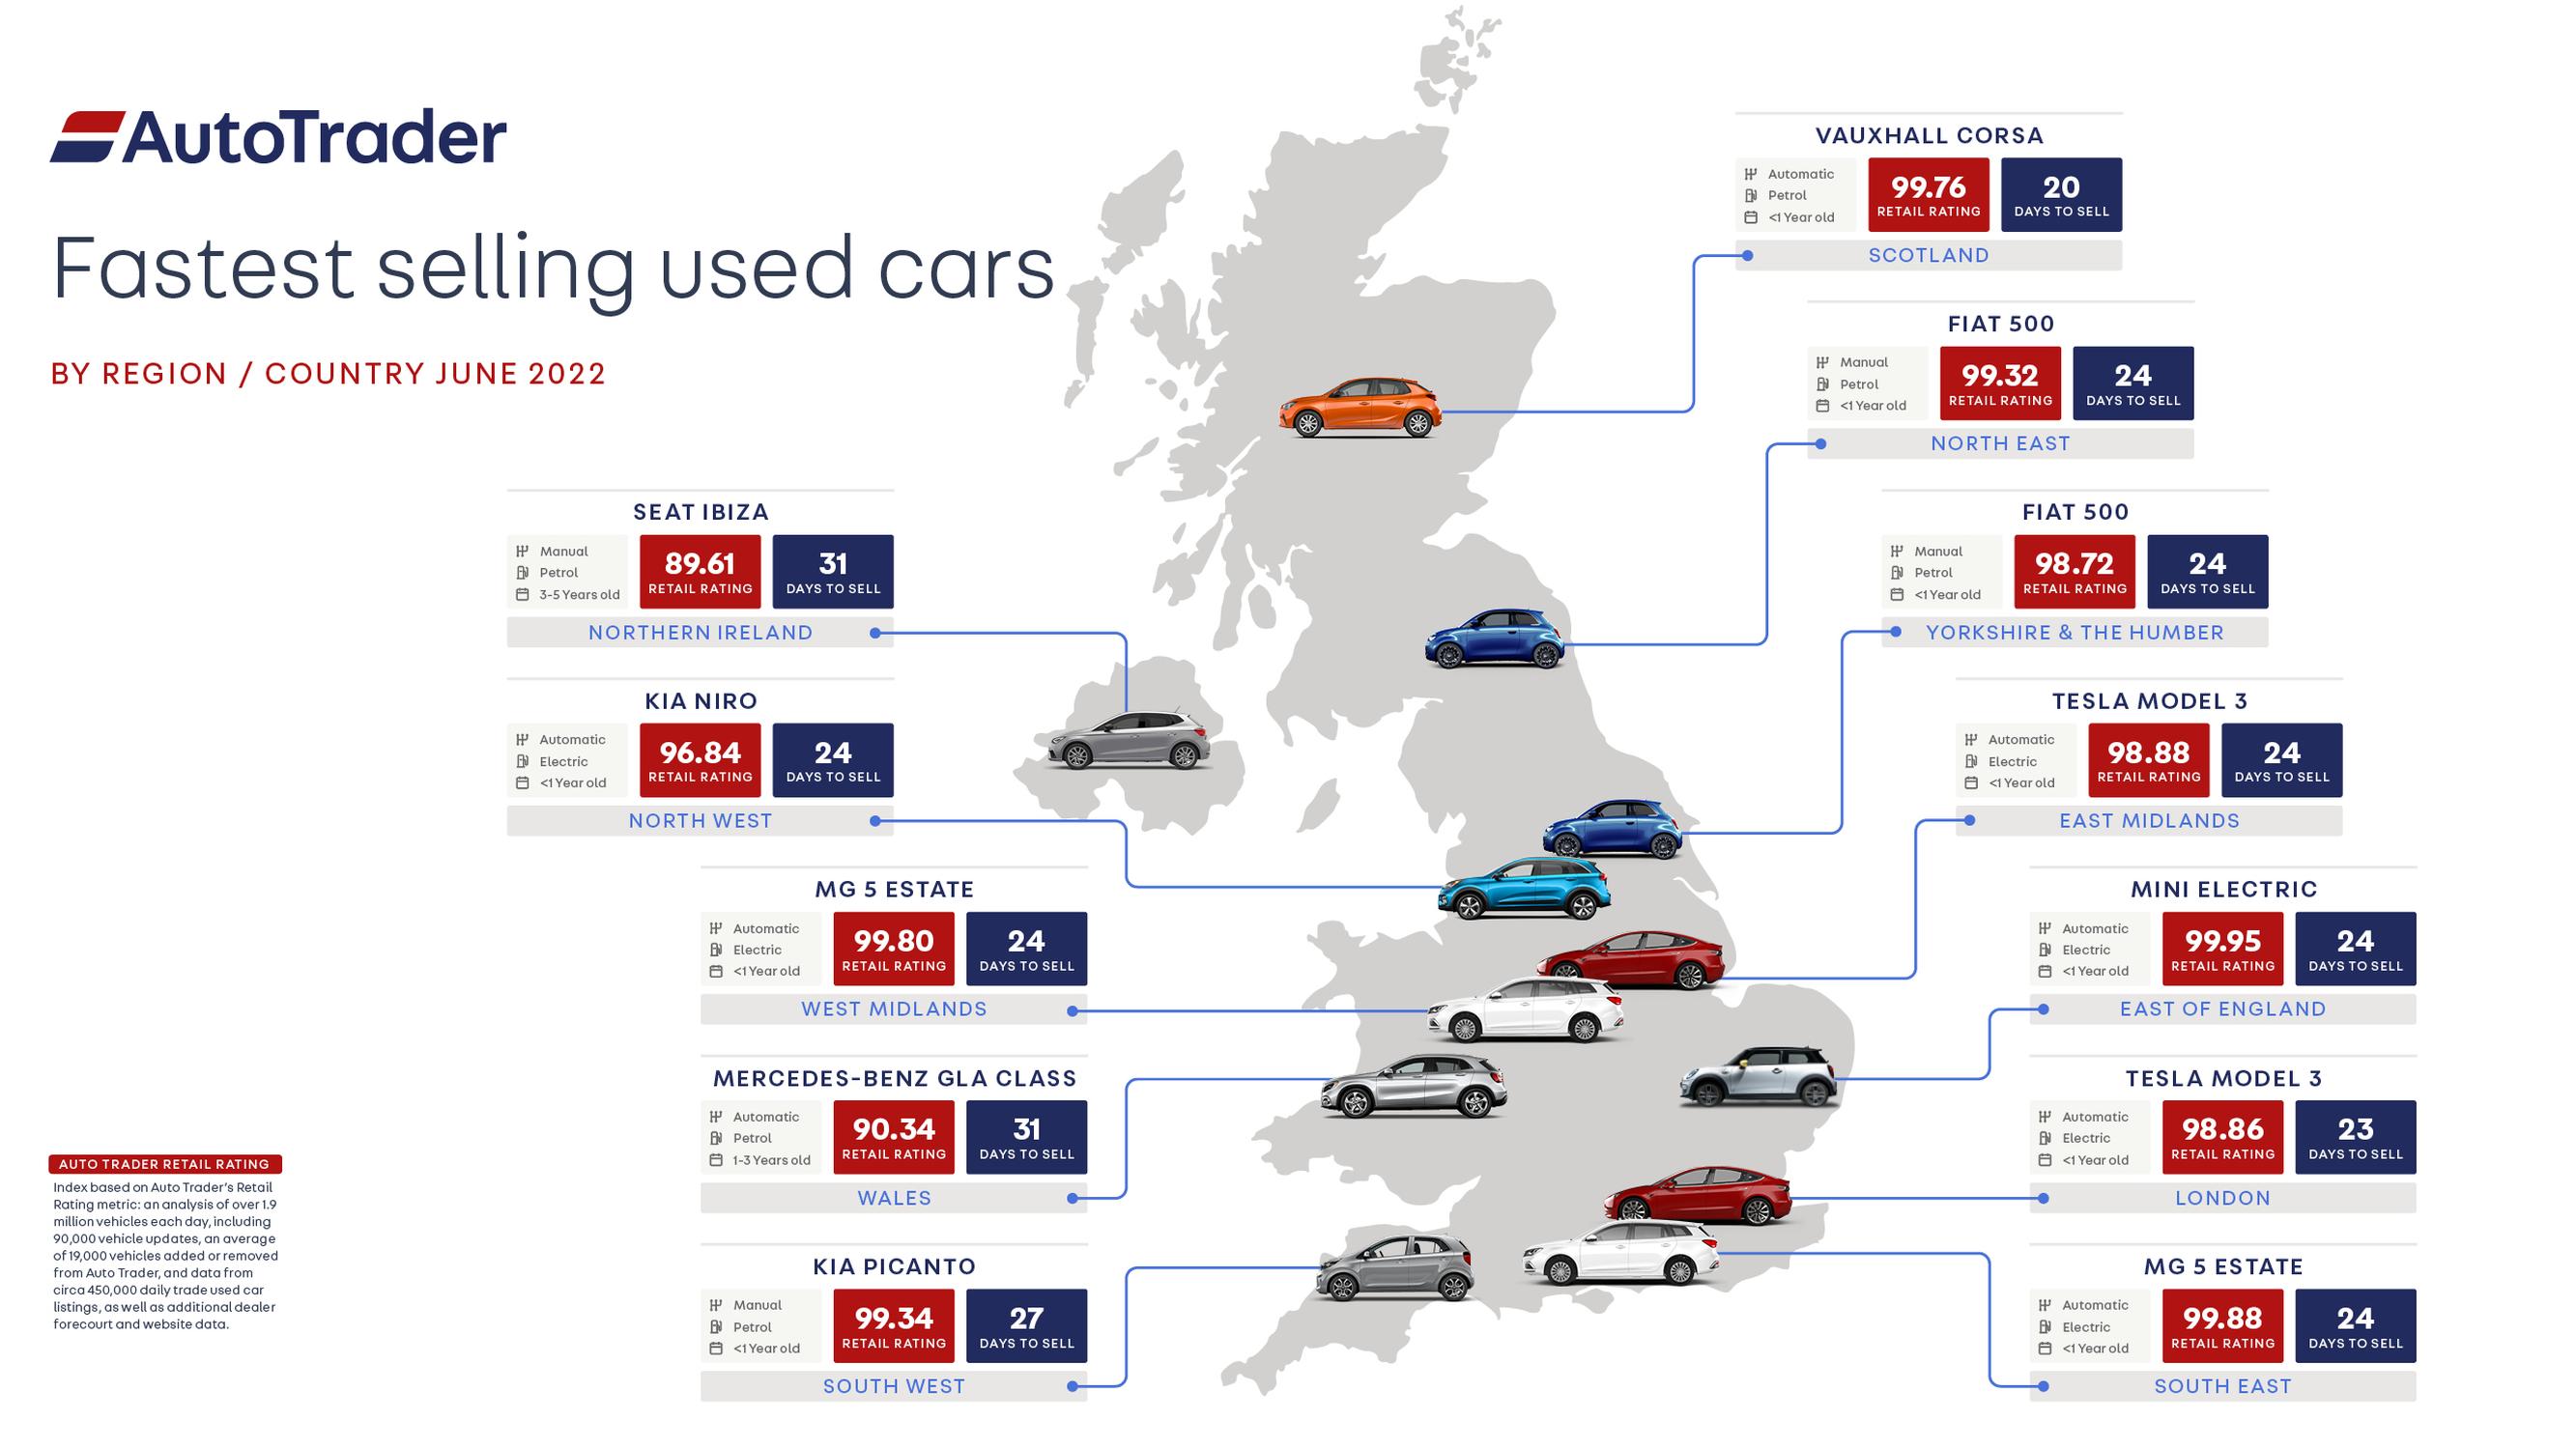 Electric cars dominate UK forecourt sales in June